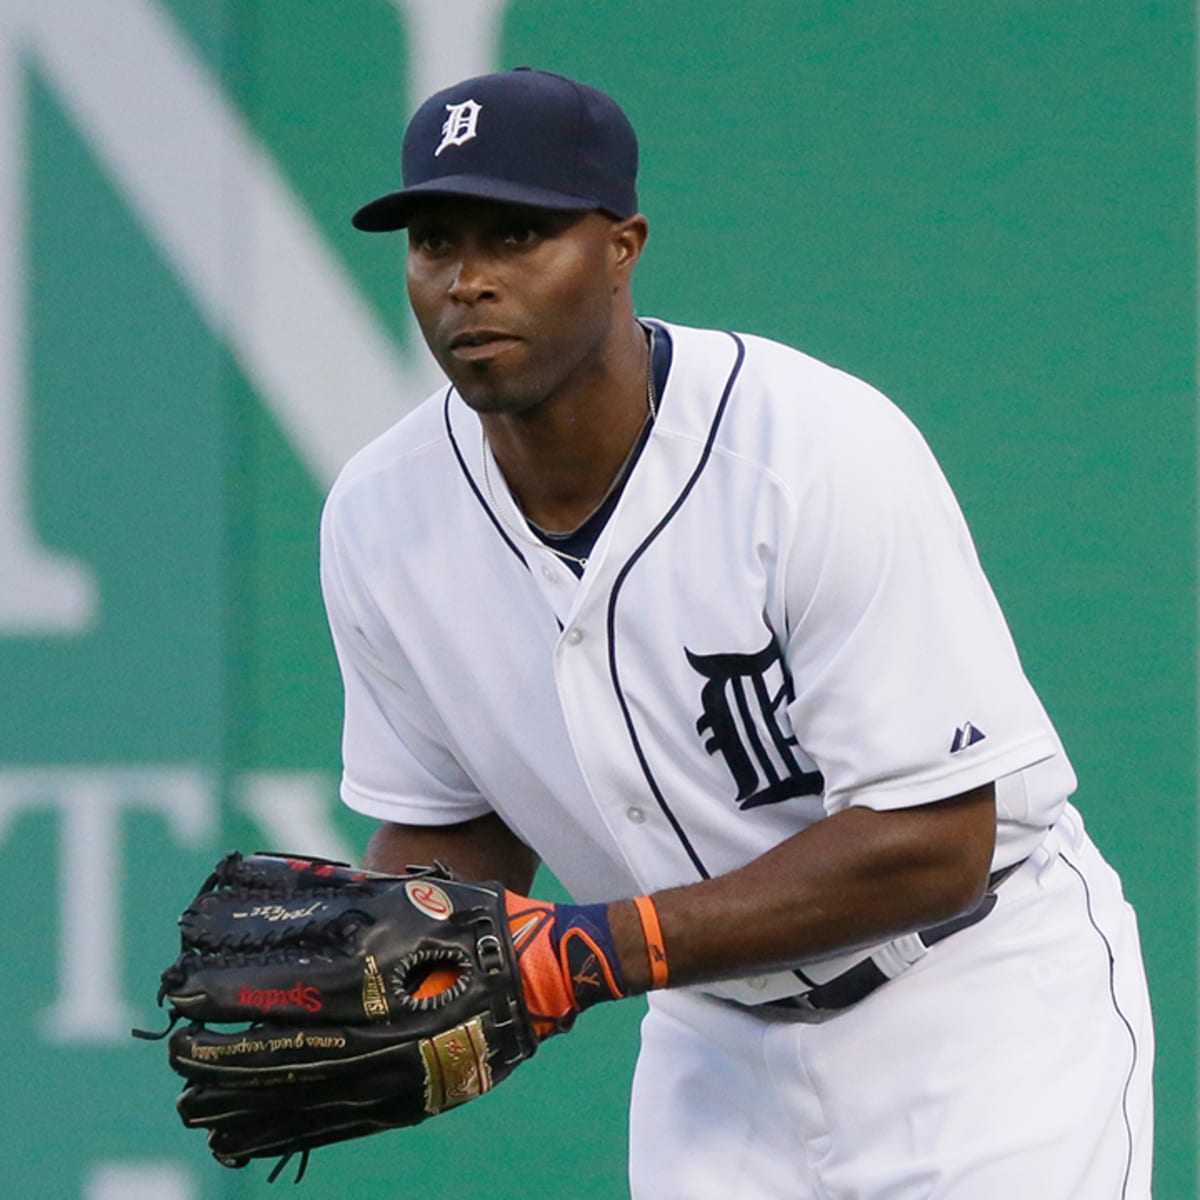 Torii Hunter, the heart of the Twins, retires at age 40 - Sports Illustrated